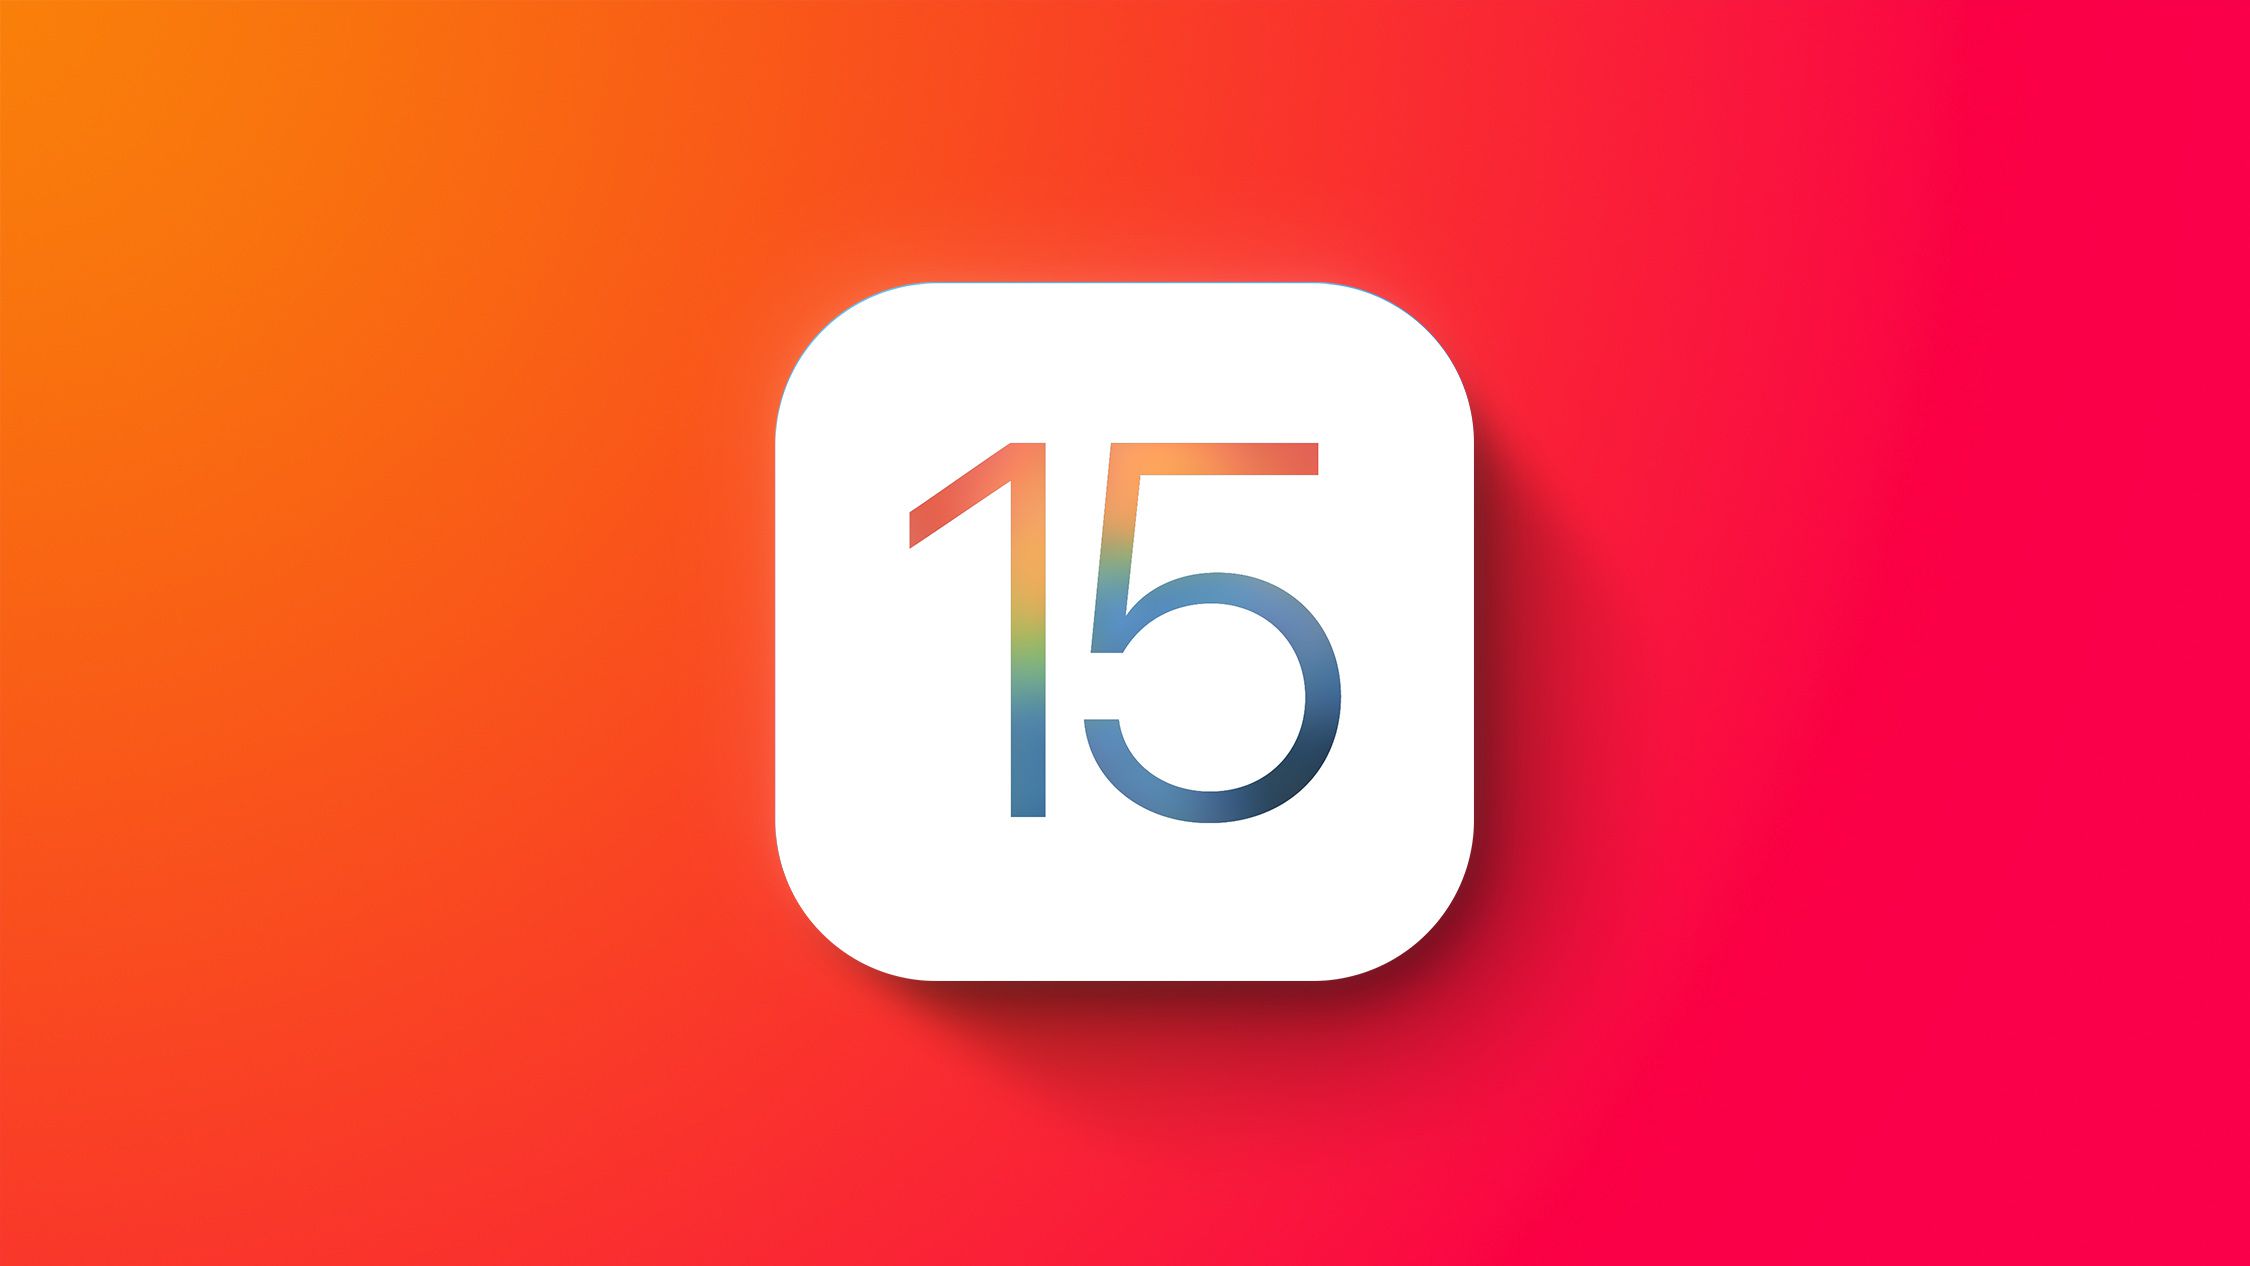 How is iOS 15 affecting email marketing?